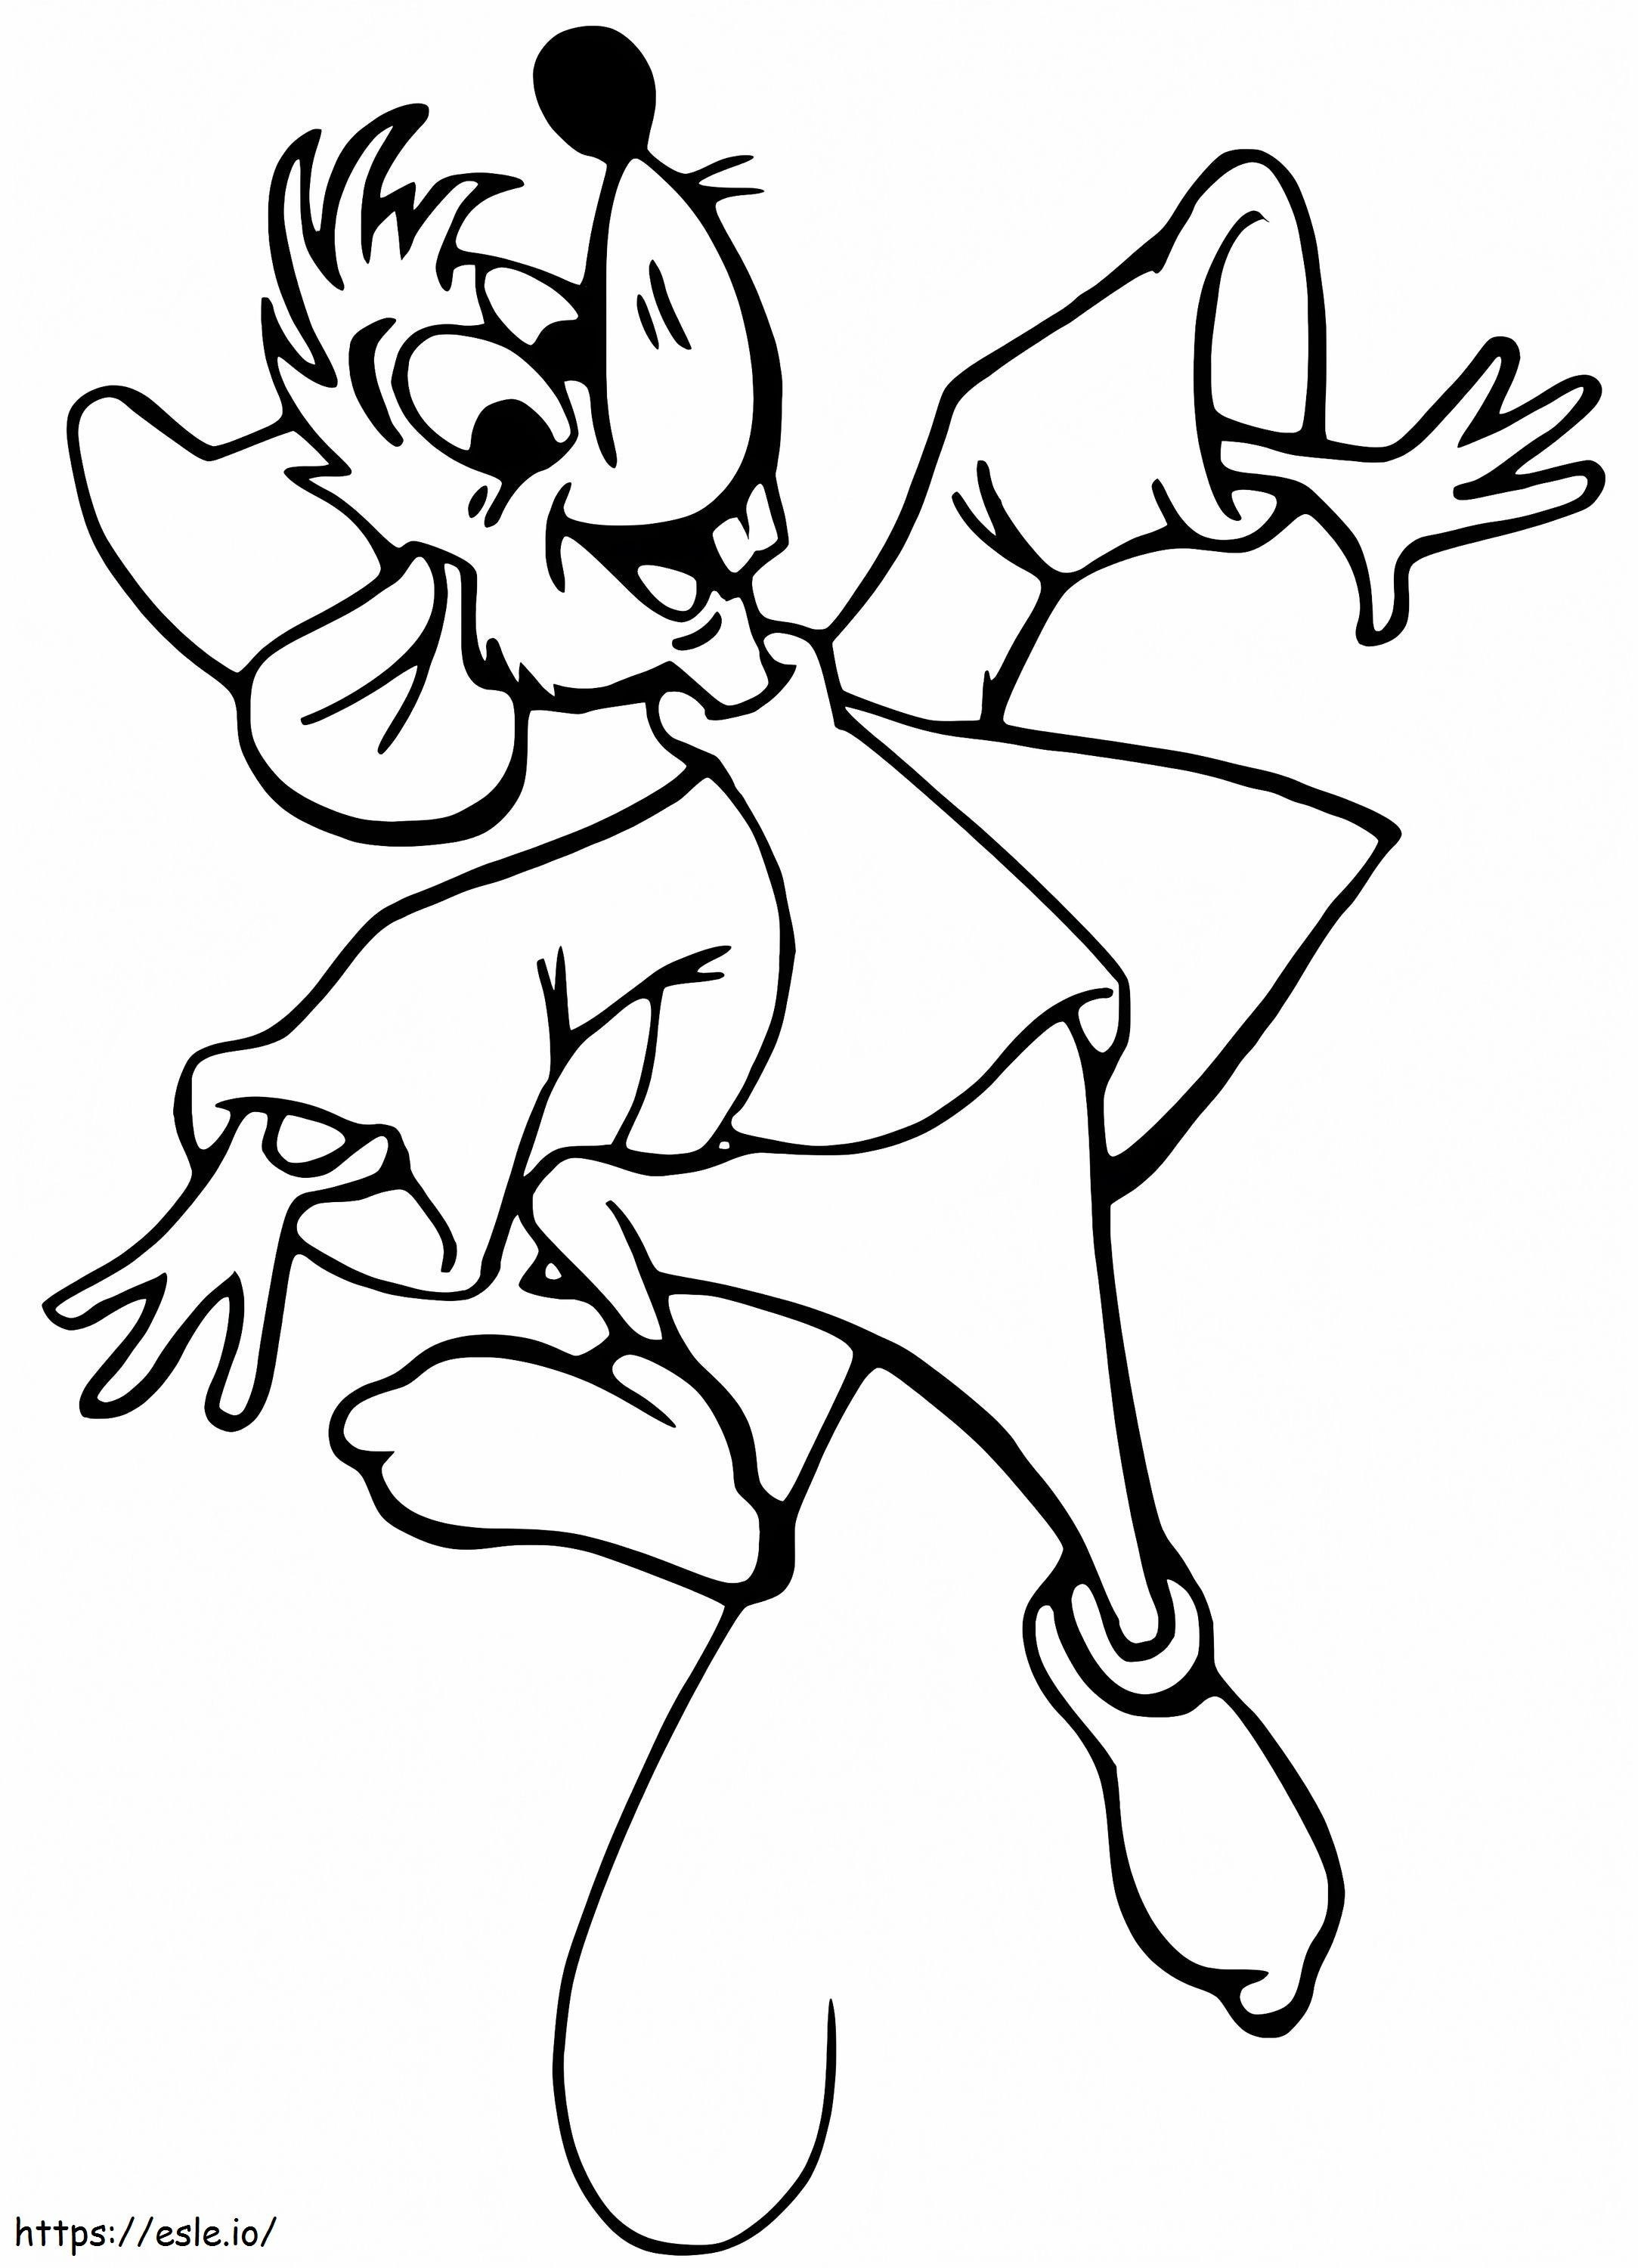 Jaq From Cinderella coloring page